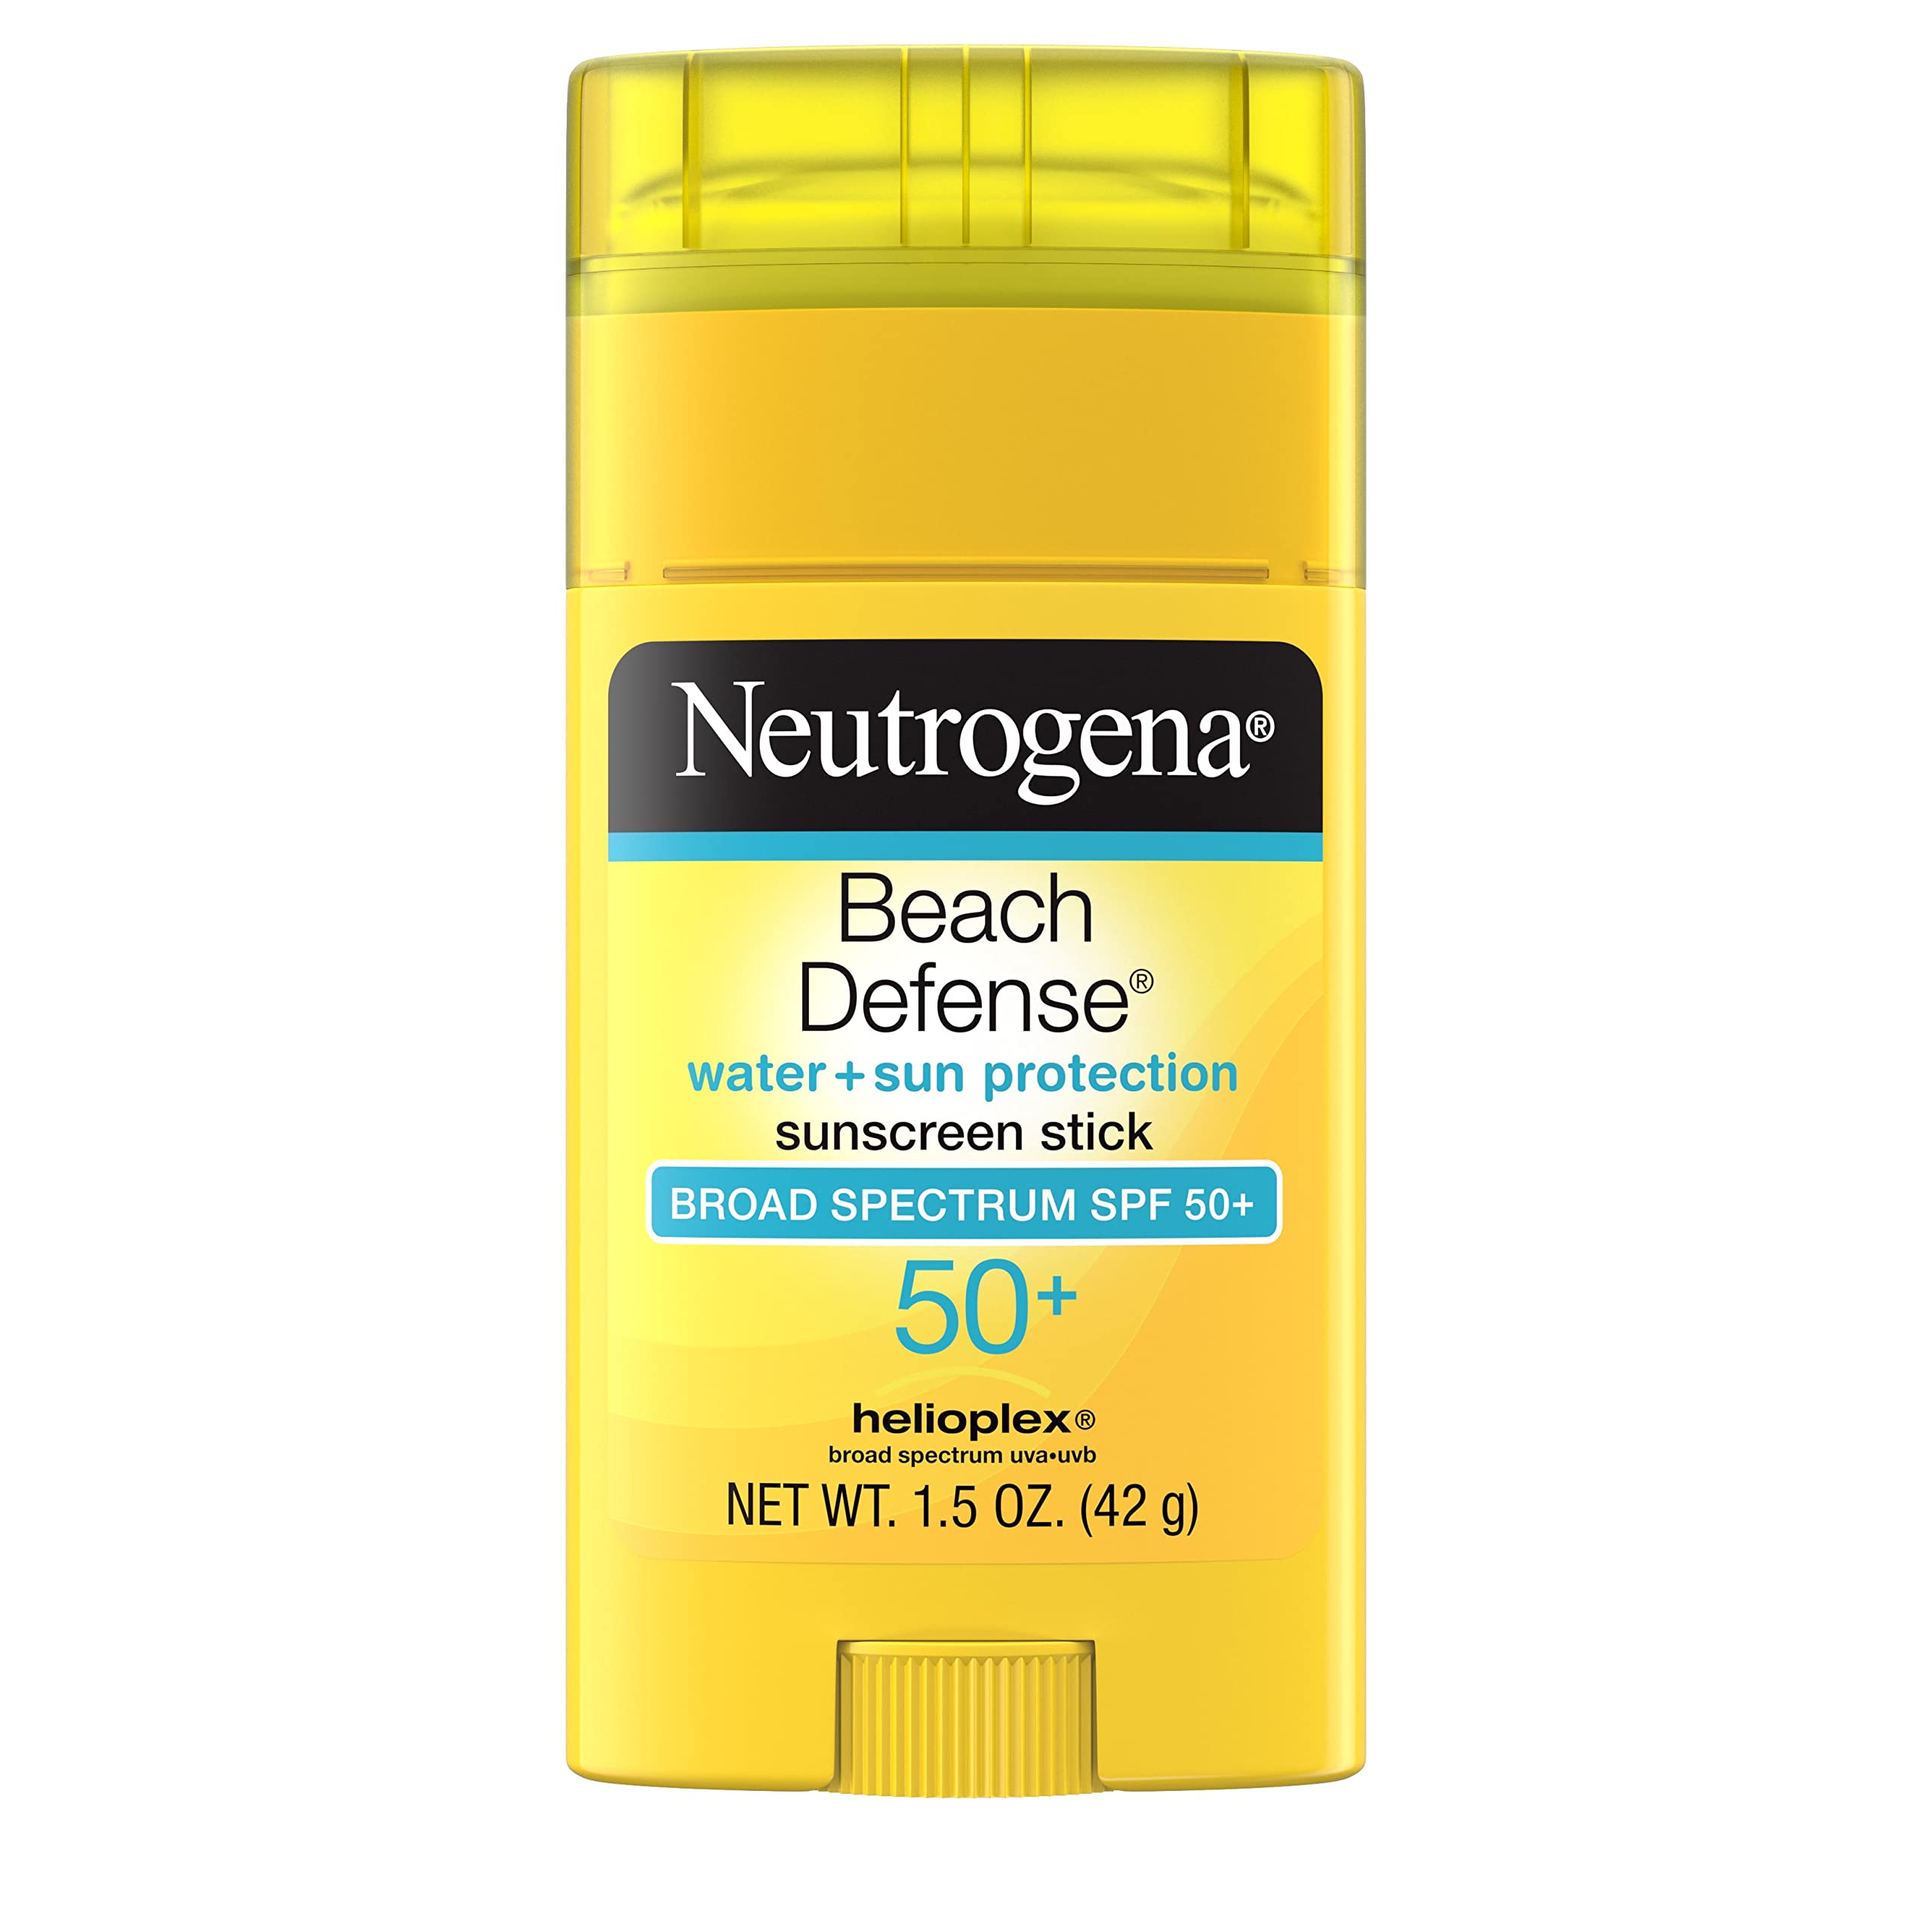 Neutrogena Beach Defense Water-Resistant SPF 50+ Sunscreen Stick, Broad Spectrum UVA/UVB Protection, PABA- & Oxybenzone-Free Face & Body Sunscreen Stick, Hands-Free Application, 1.5 oz